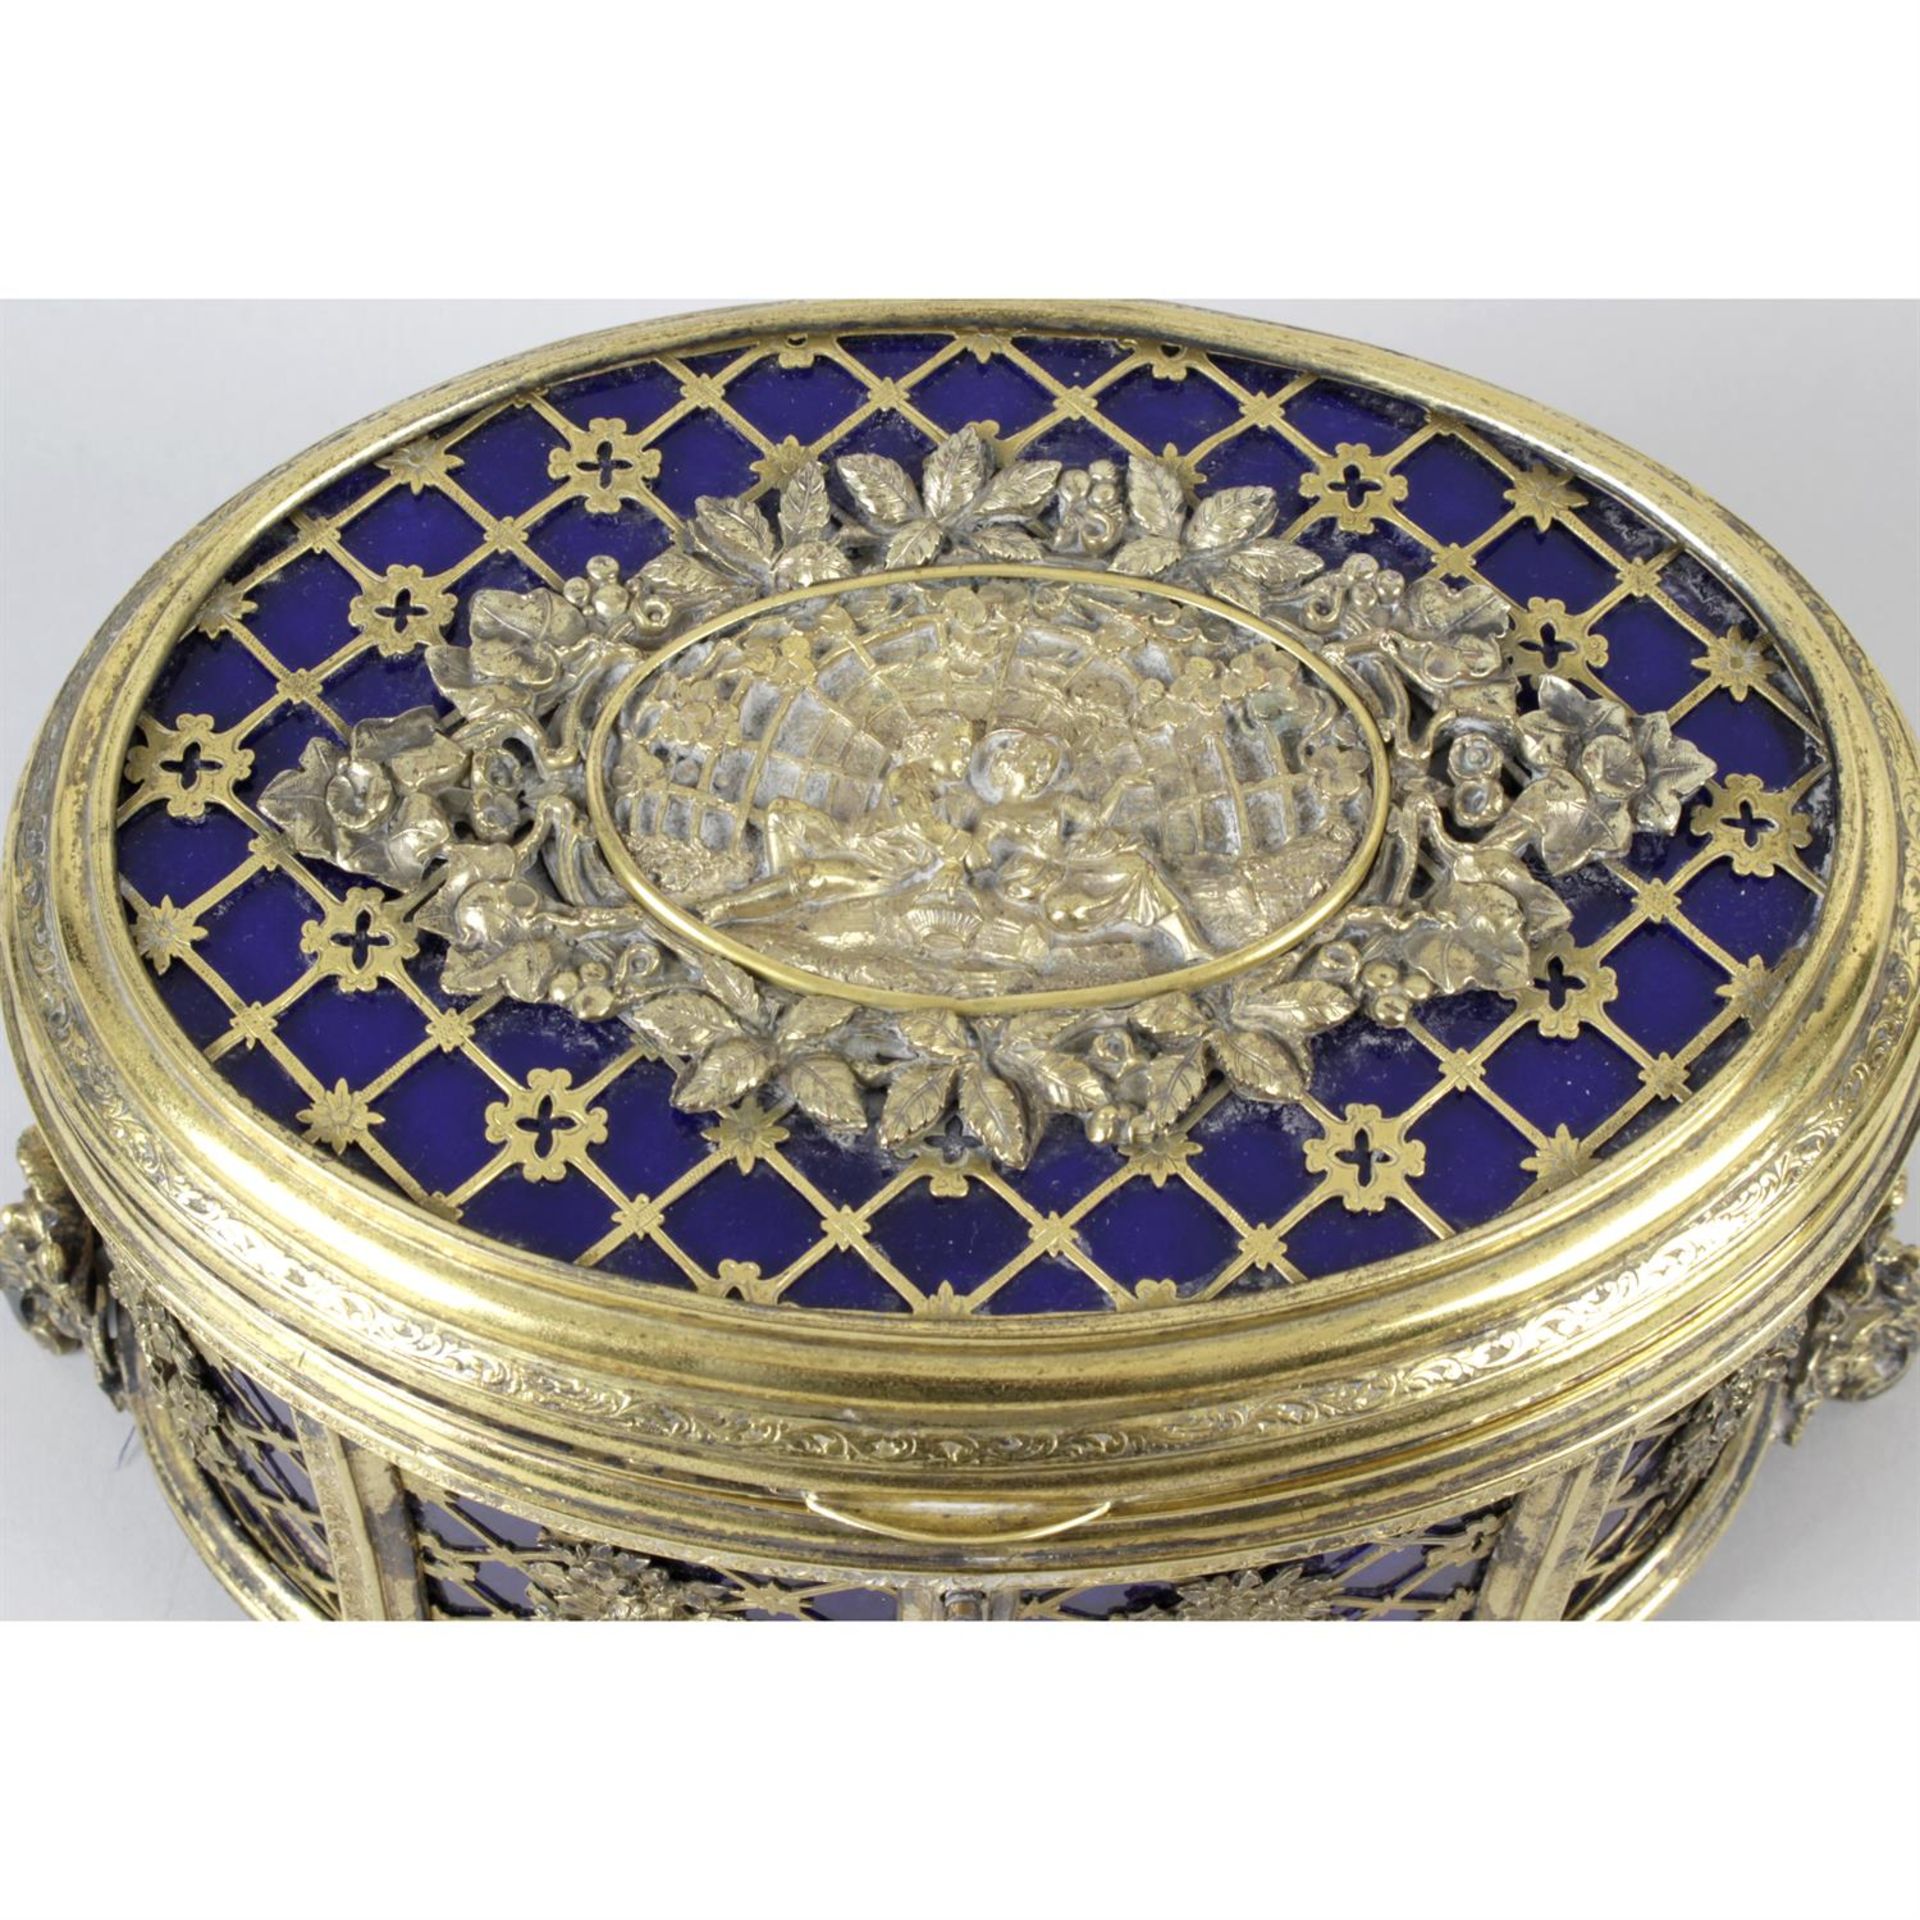 An elaborate late 19th century Boissier a Paris gilt metal casket and cover. - Image 2 of 2